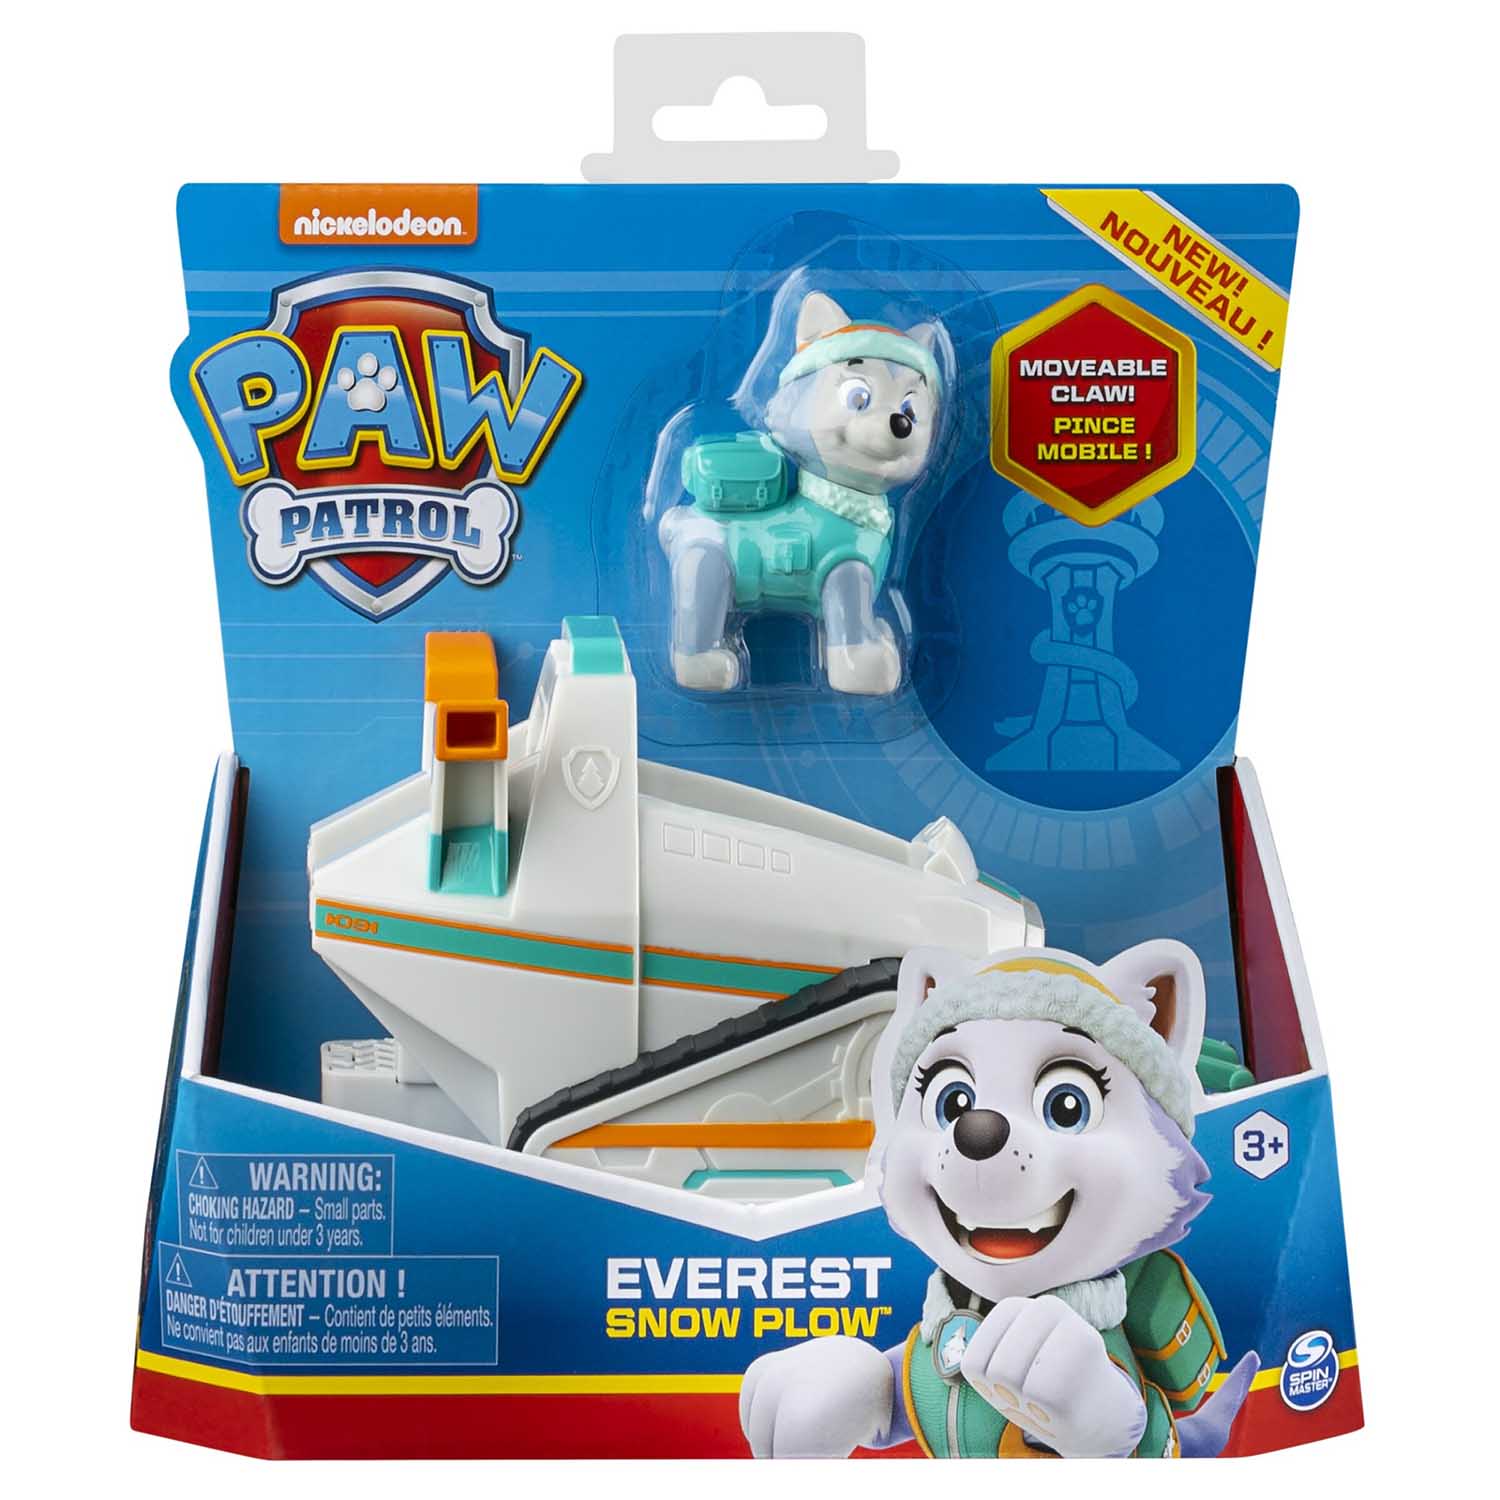 Paw Patrol - Everest Snow Plow Vehicle with Collectible Figure